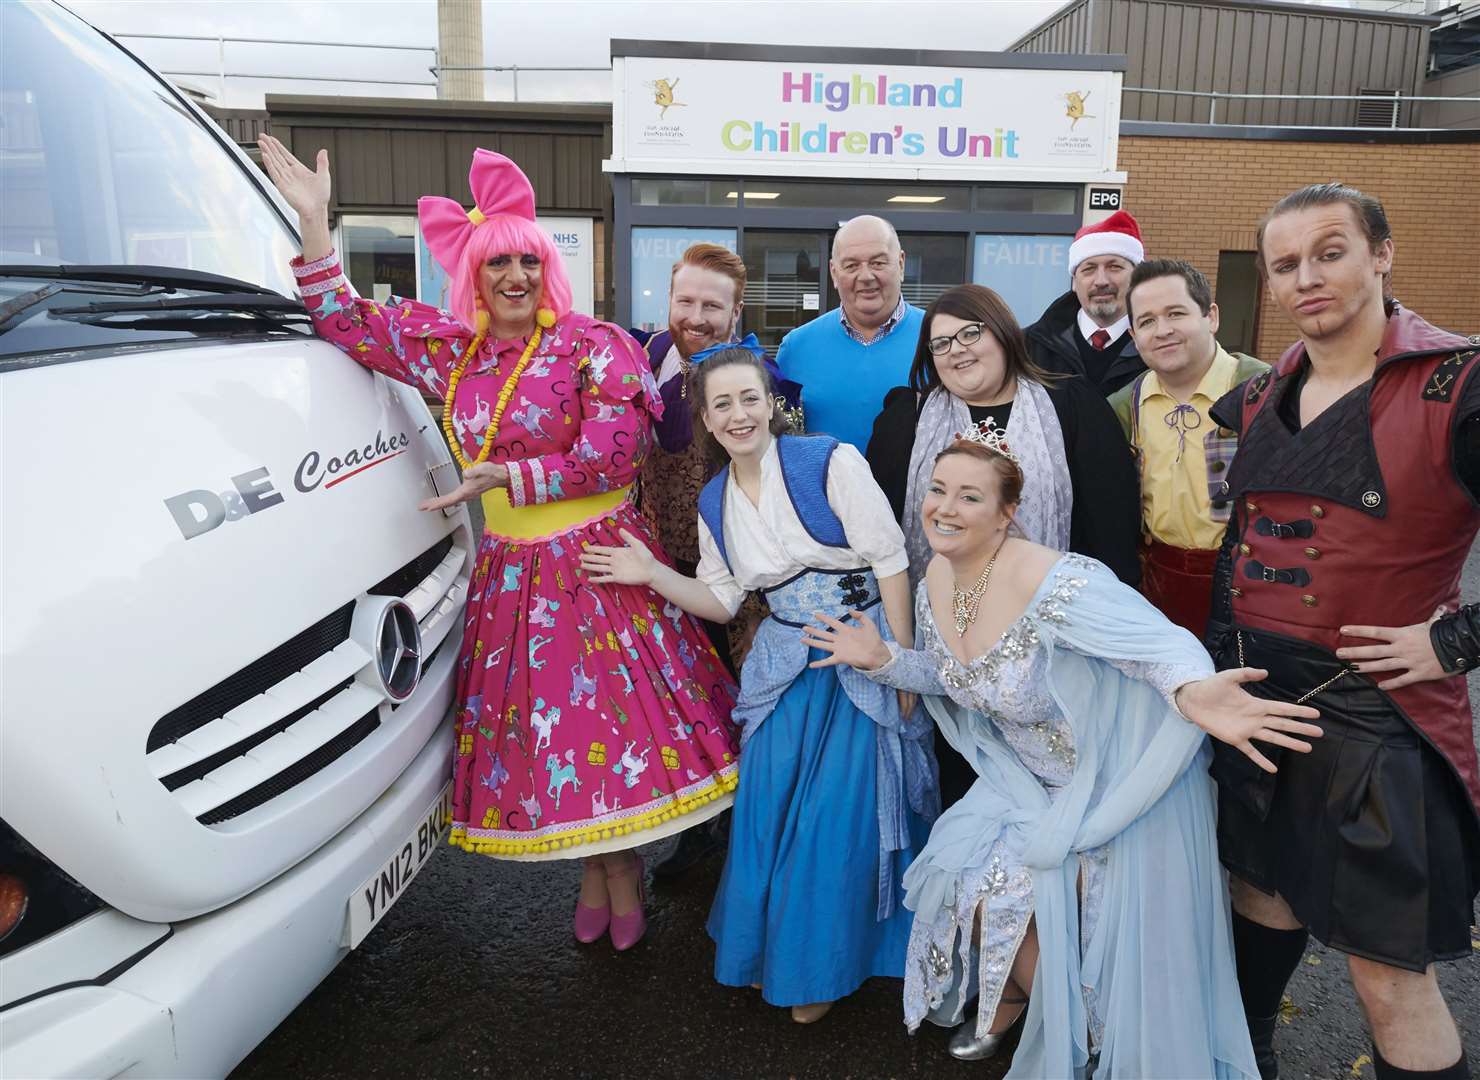 The panto cast, along with D&E managing director Donald Mathieson, arrive at Raigmore Hospital.